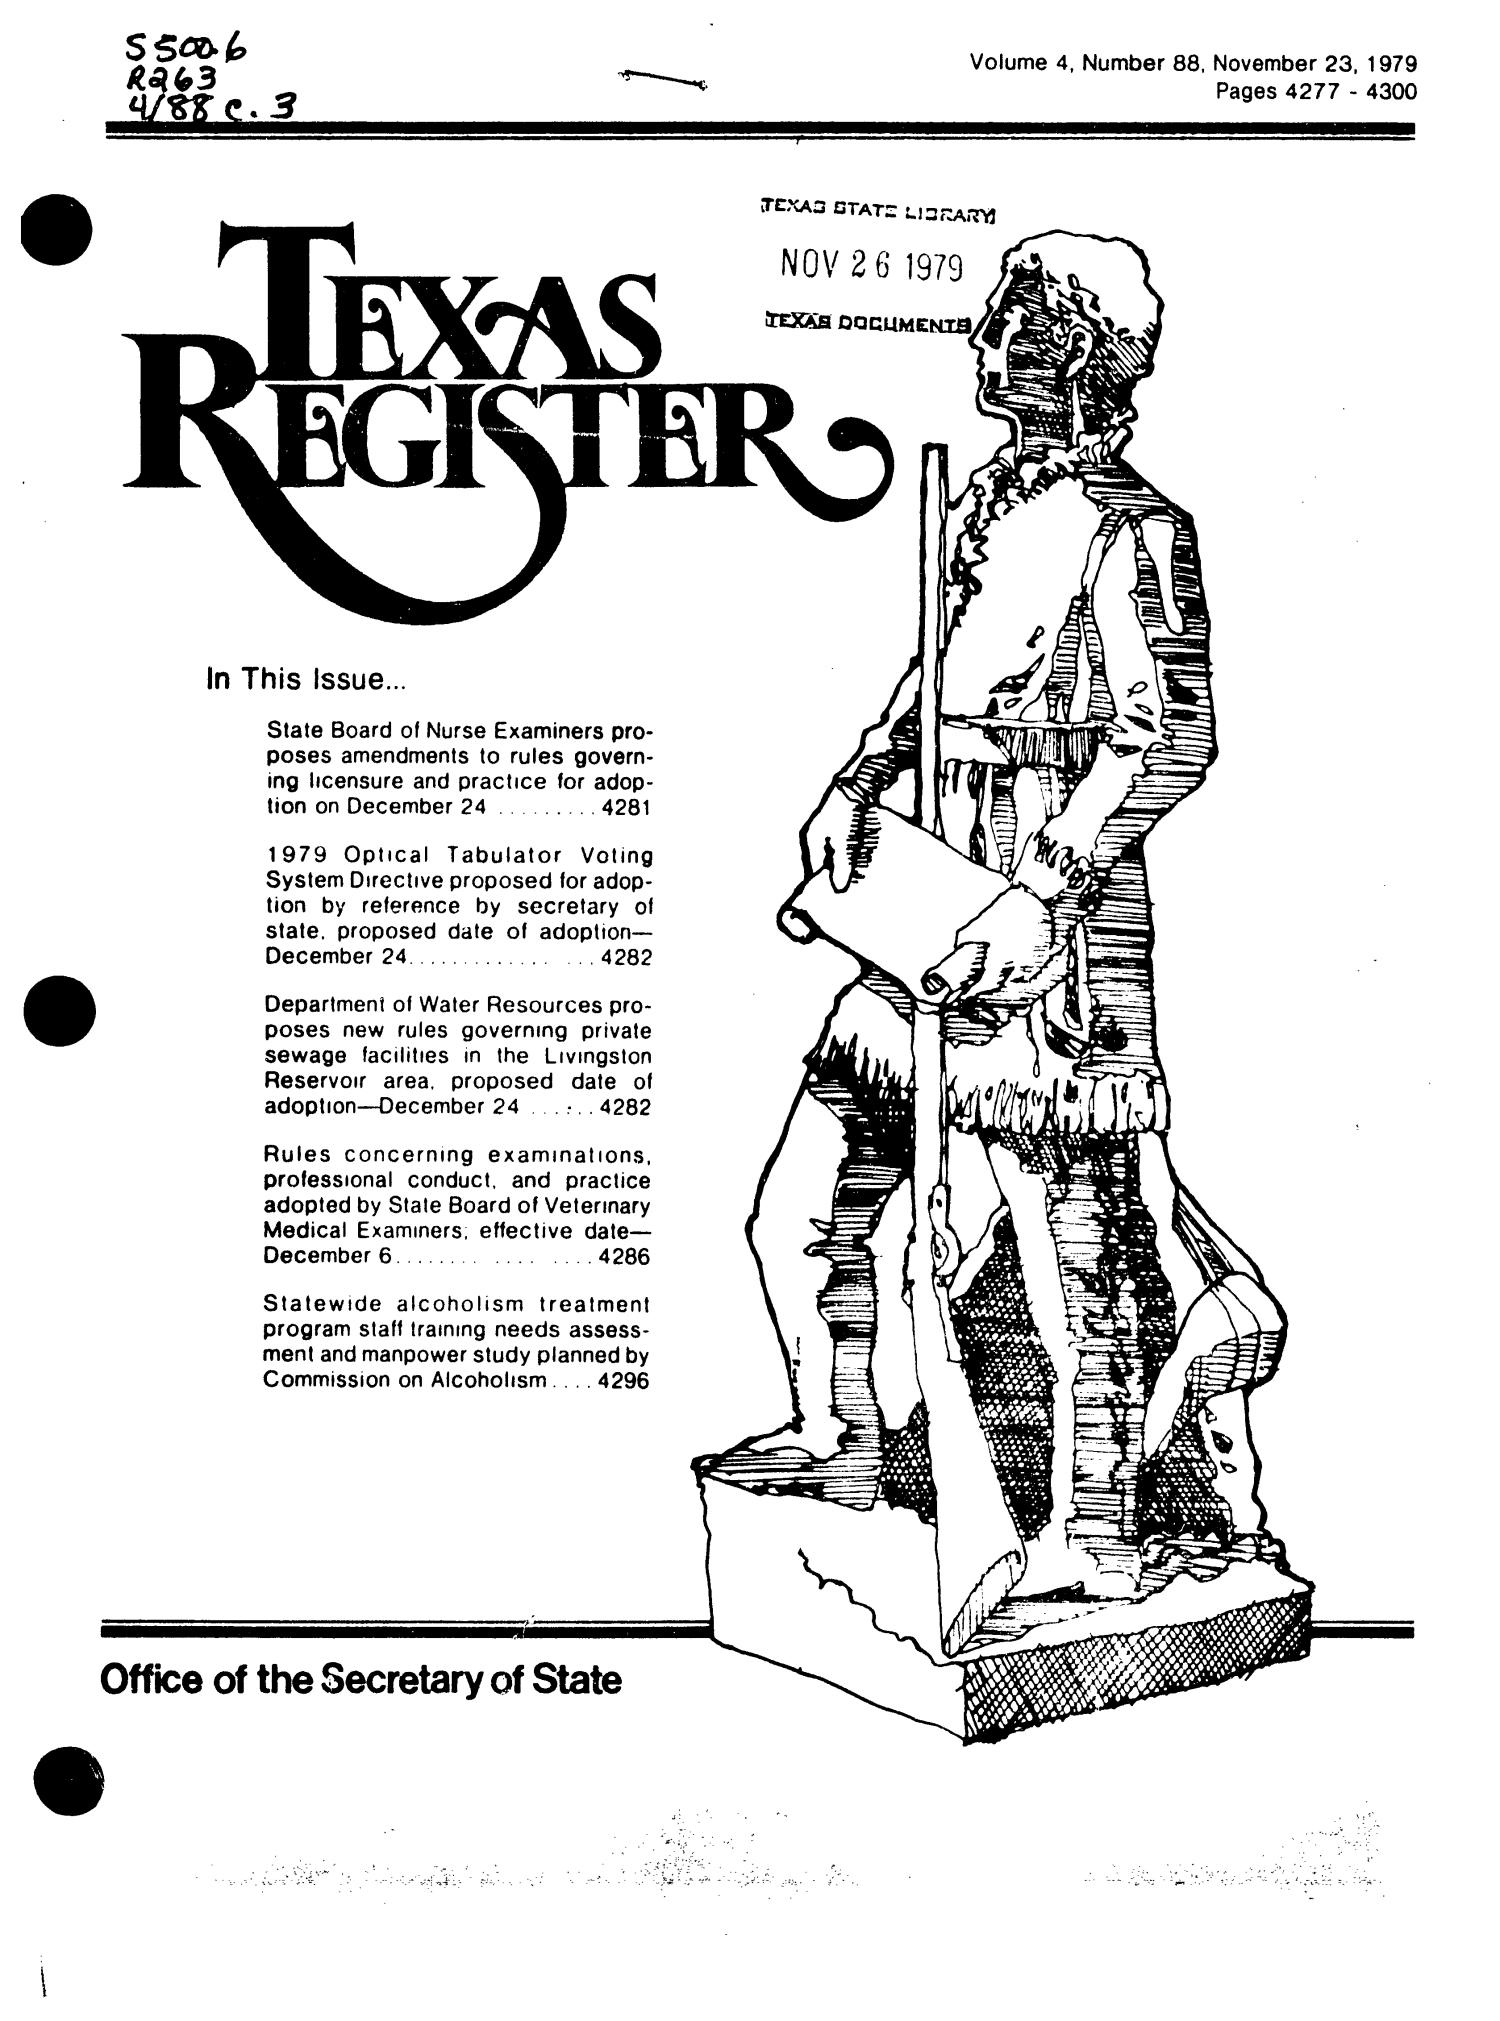 Texas Register, Volume 4, Number 88, Pages 4277-4300, November 23, 1979
                                                
                                                    Title Page
                                                